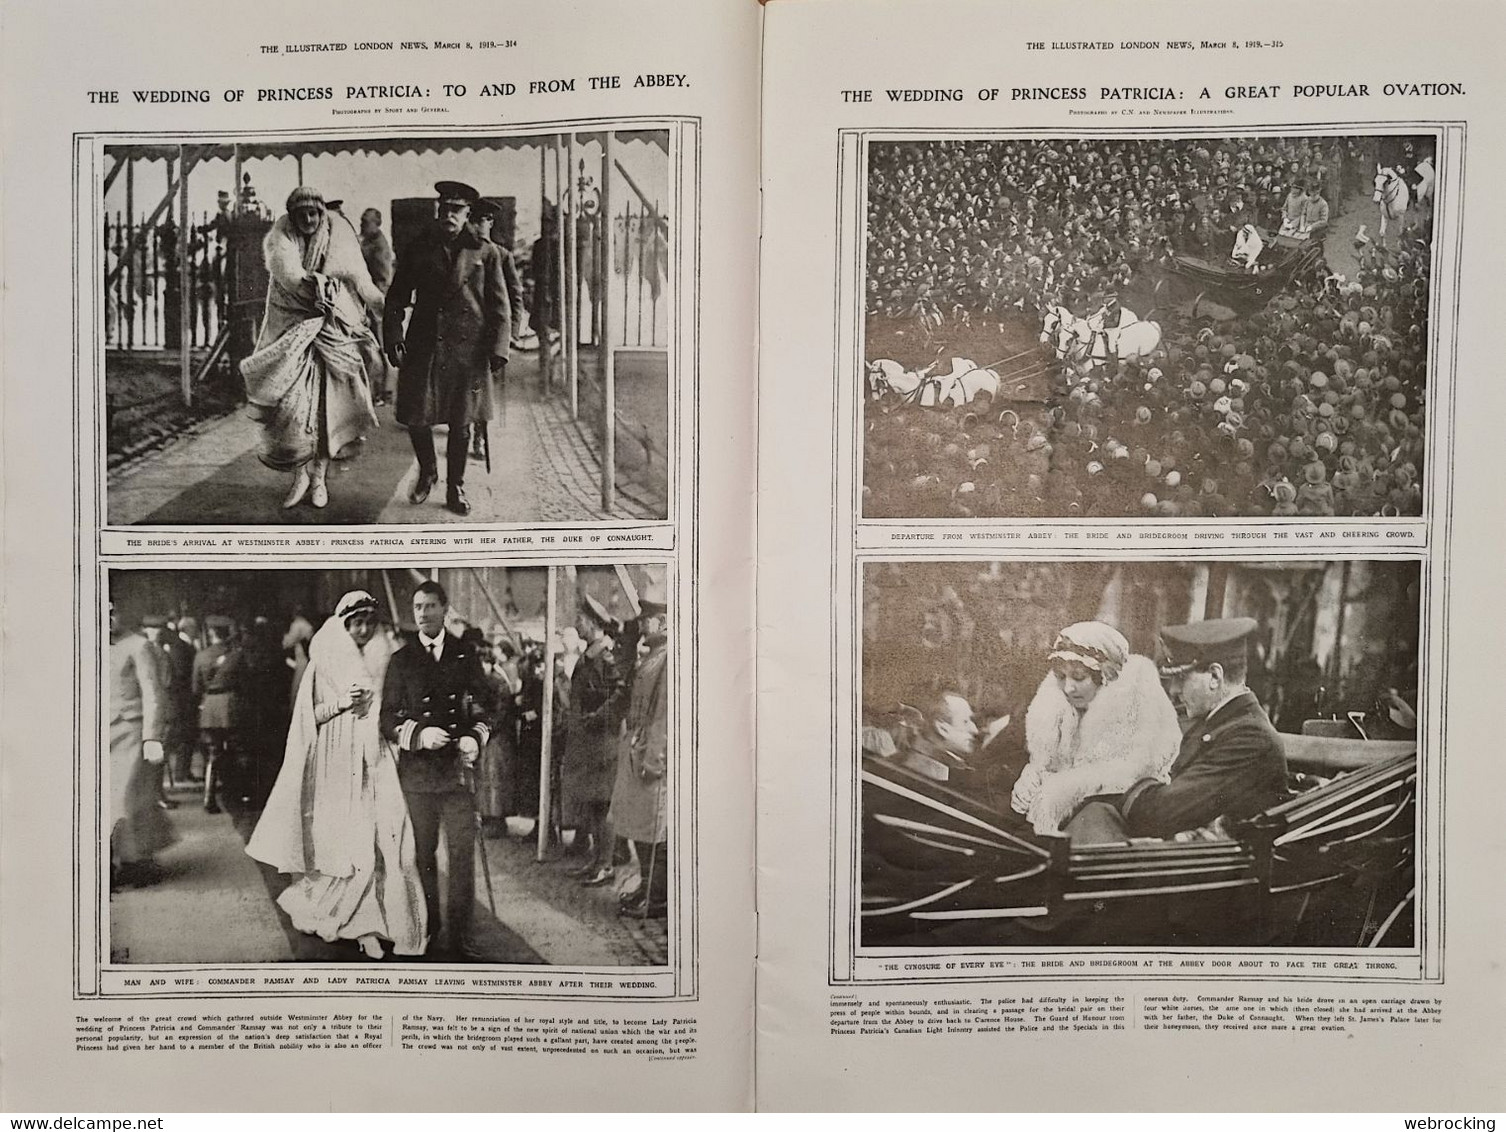 Complete Vintage Magazine - The Illustrated London News - March 8, 1919 - The Wedding Of Princess Patricia - Europa